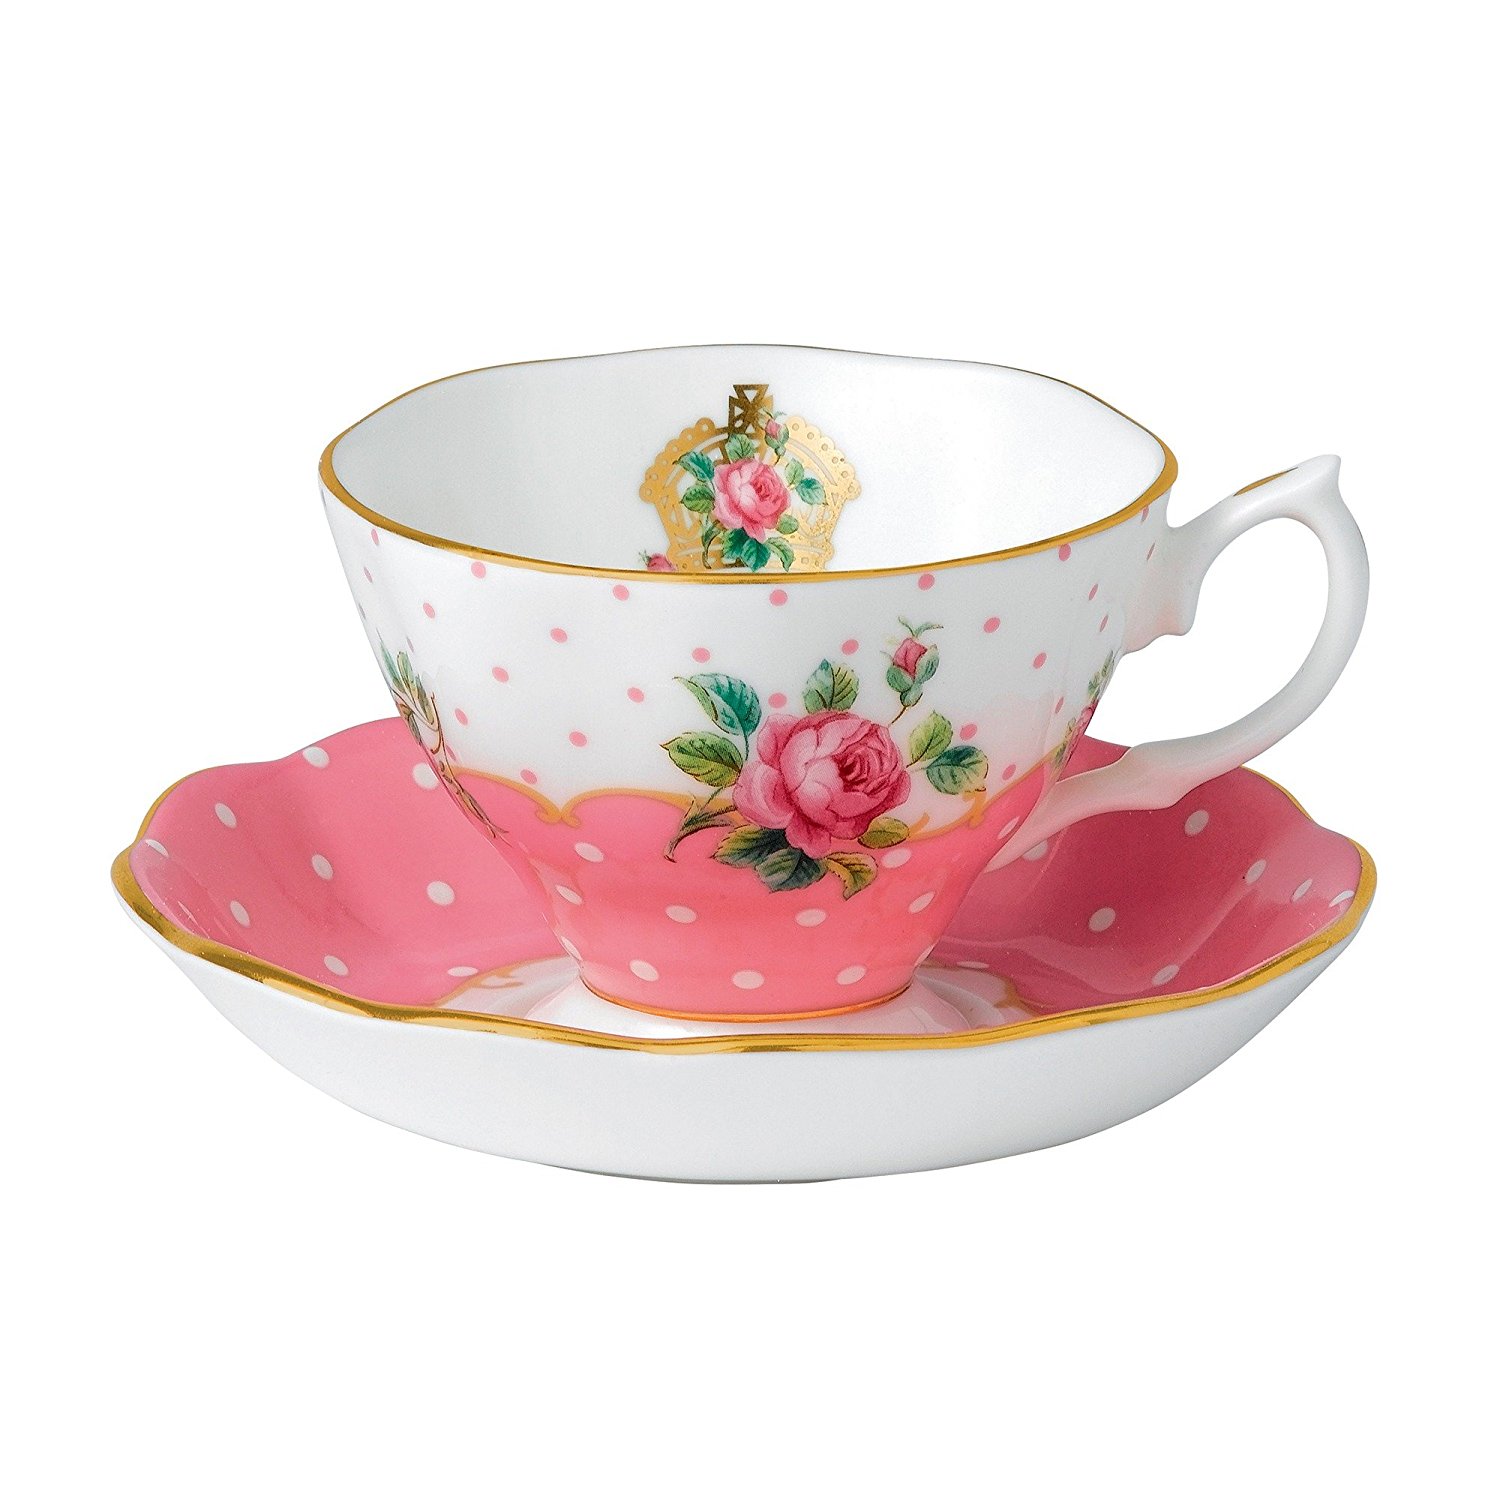 Royal Albert New Country Roses Vintage Teacup and Saucer, White